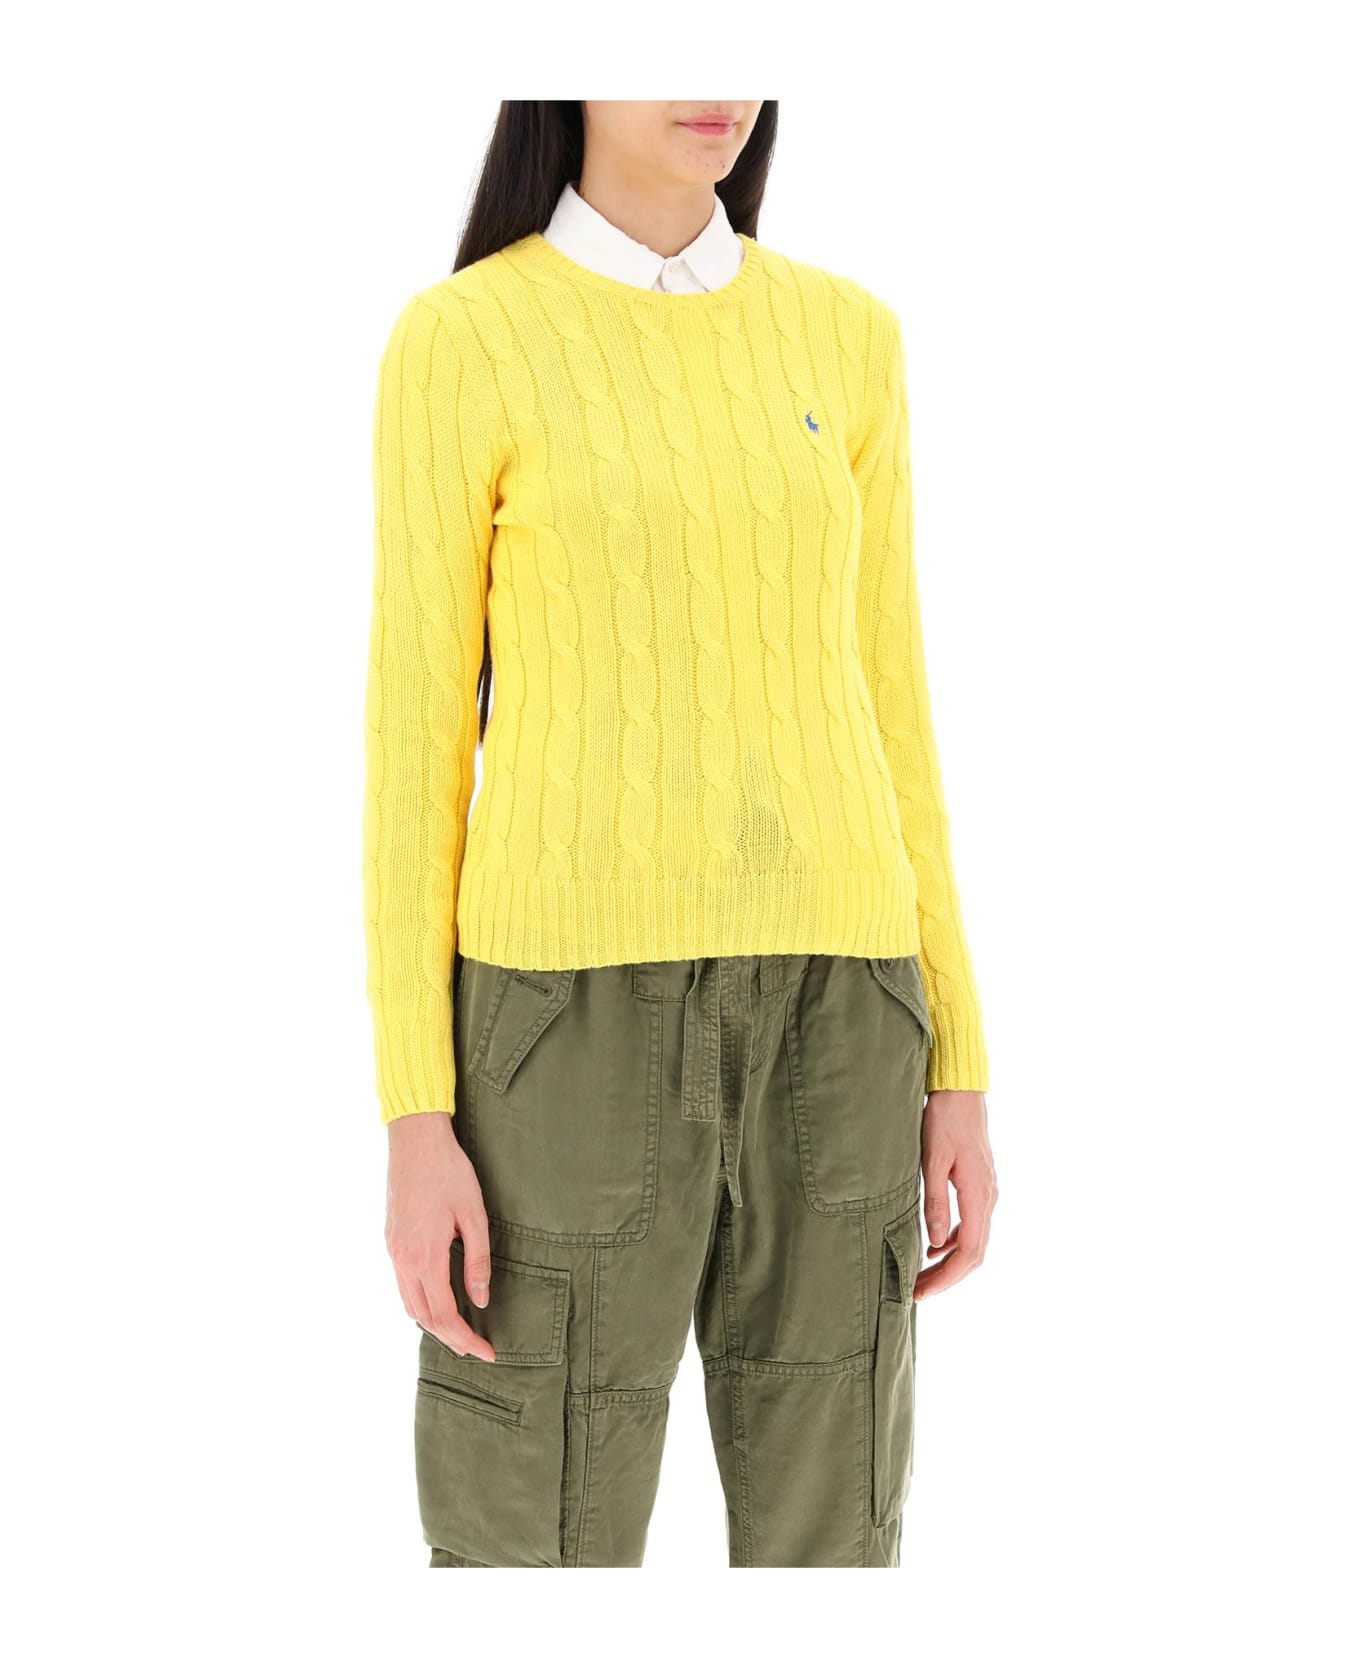 Polo Ralph Lauren Cable Knit Cotton Sweater - TRAINER YELLOW (Yellow)